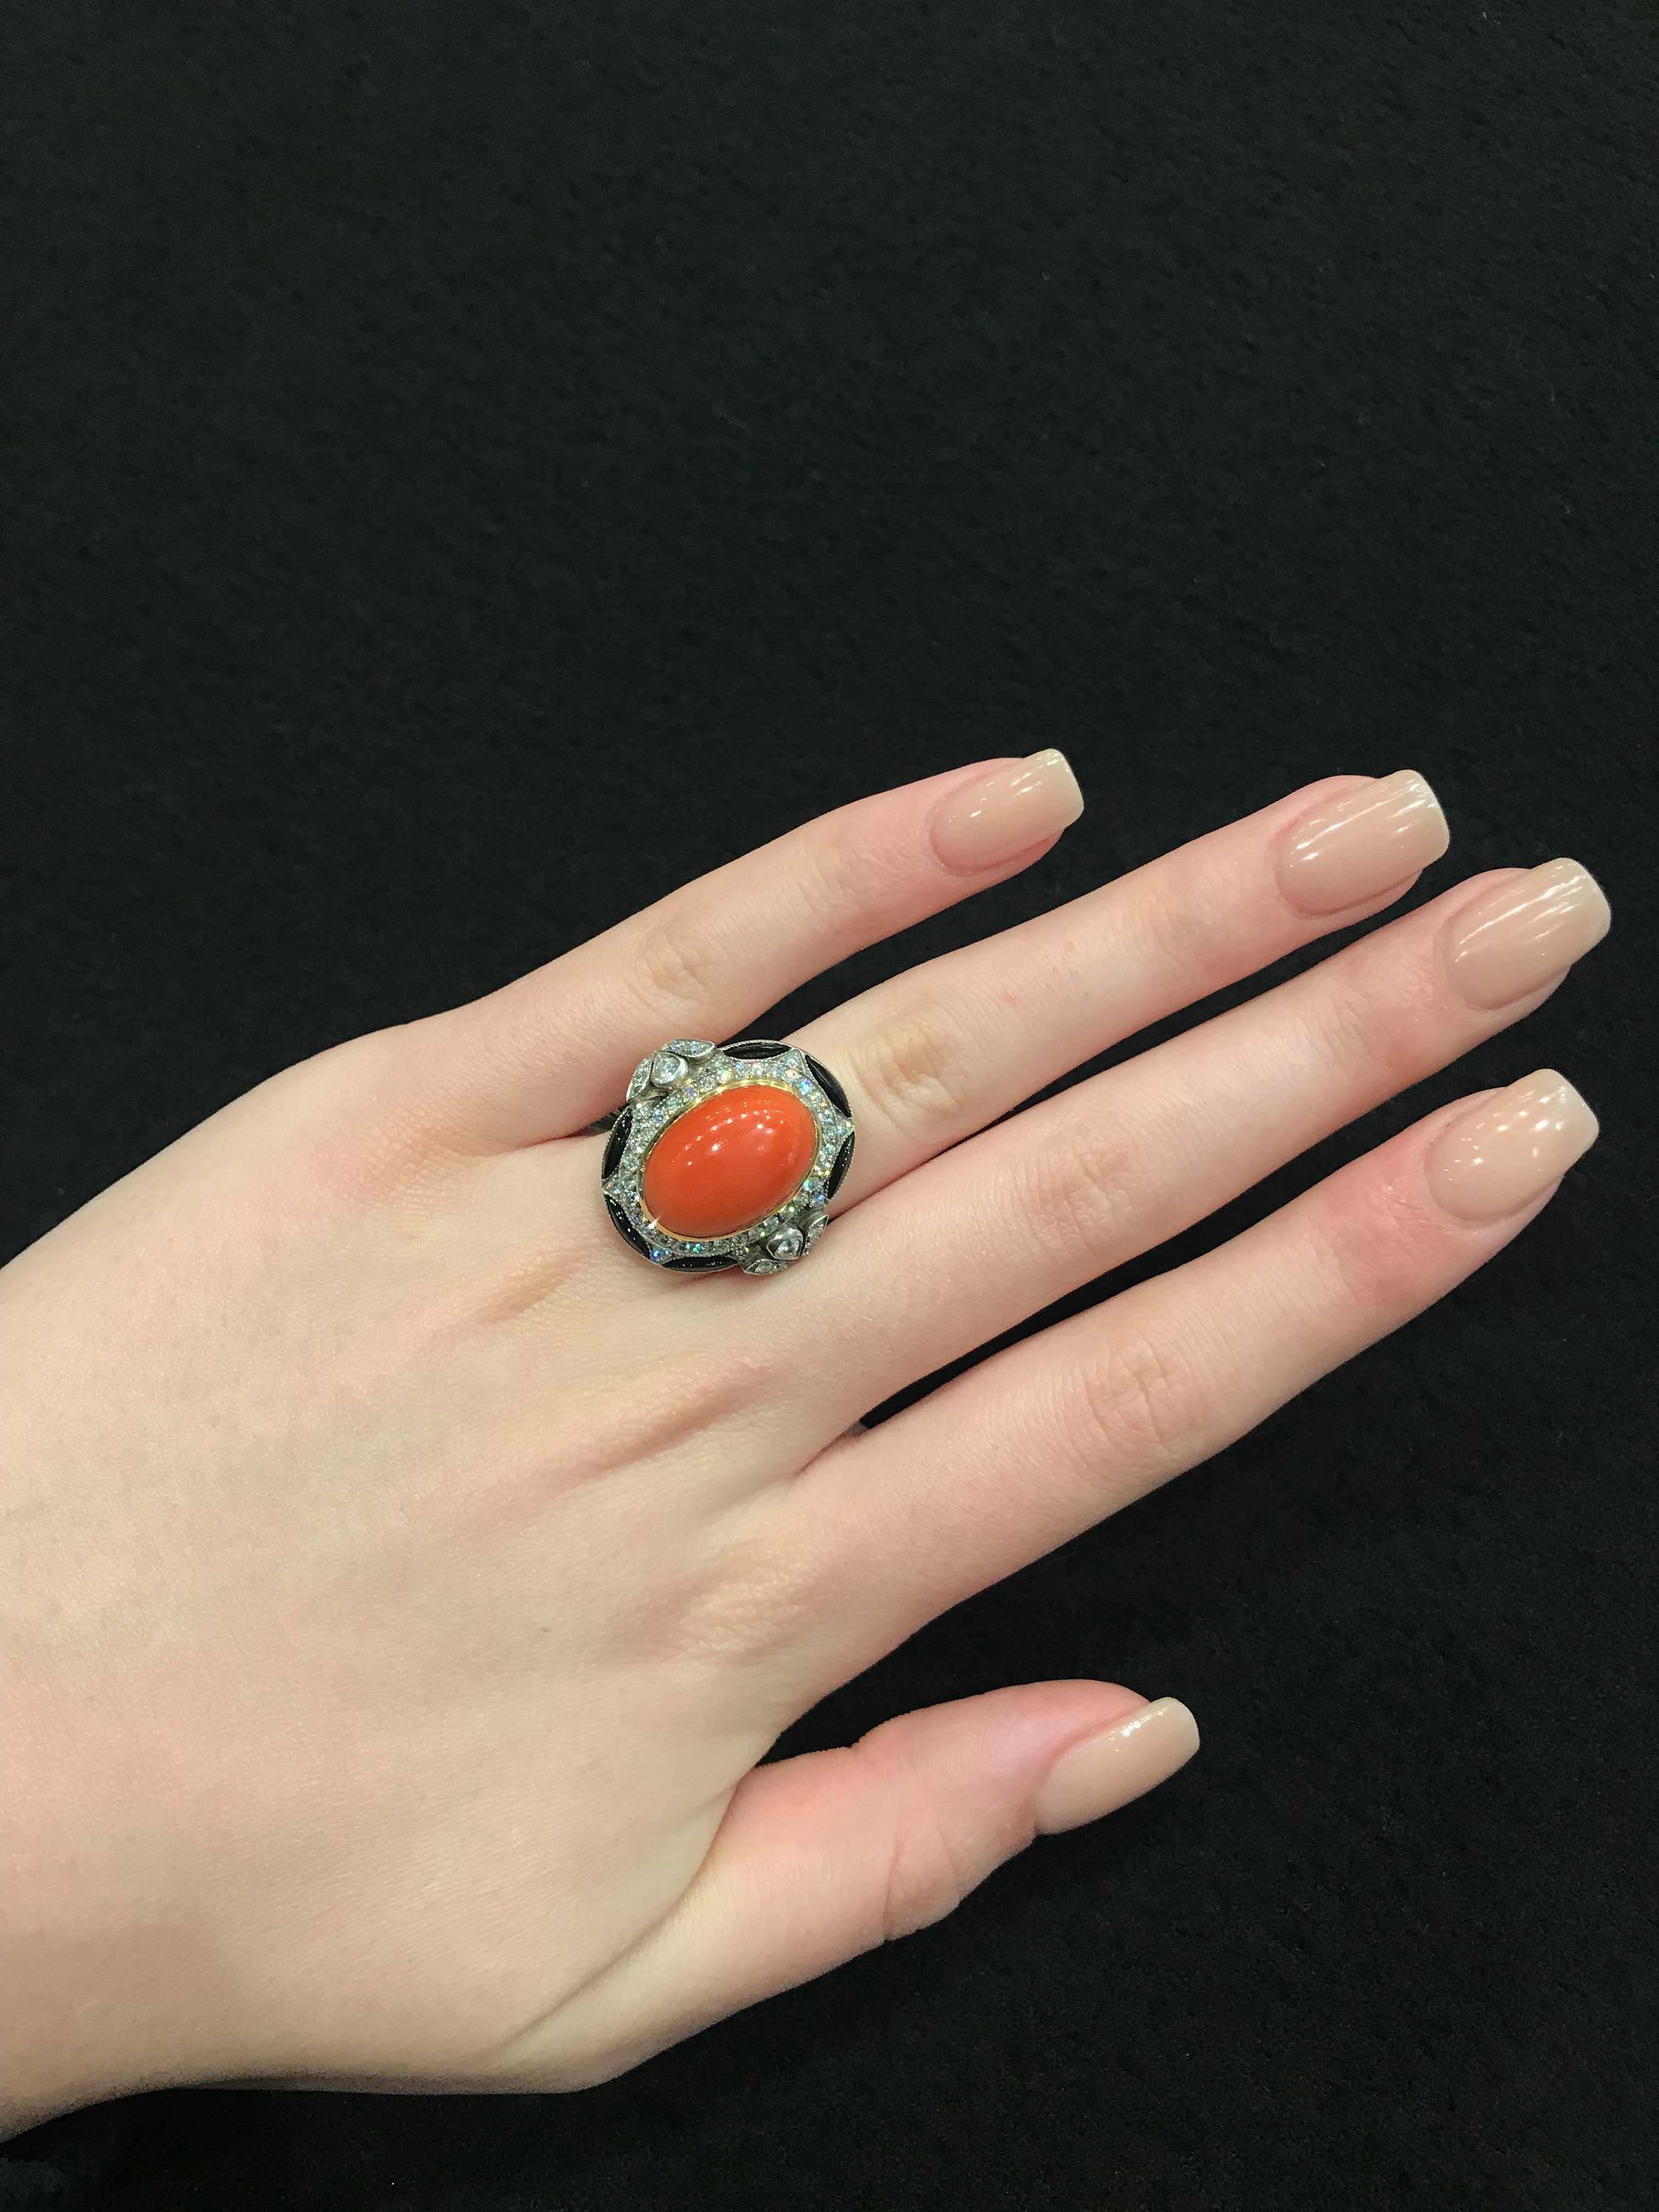 Coral 9.37 Carat Diamond and Onyx Dress Ring In Excellent Condition For Sale In Melbourne, AU